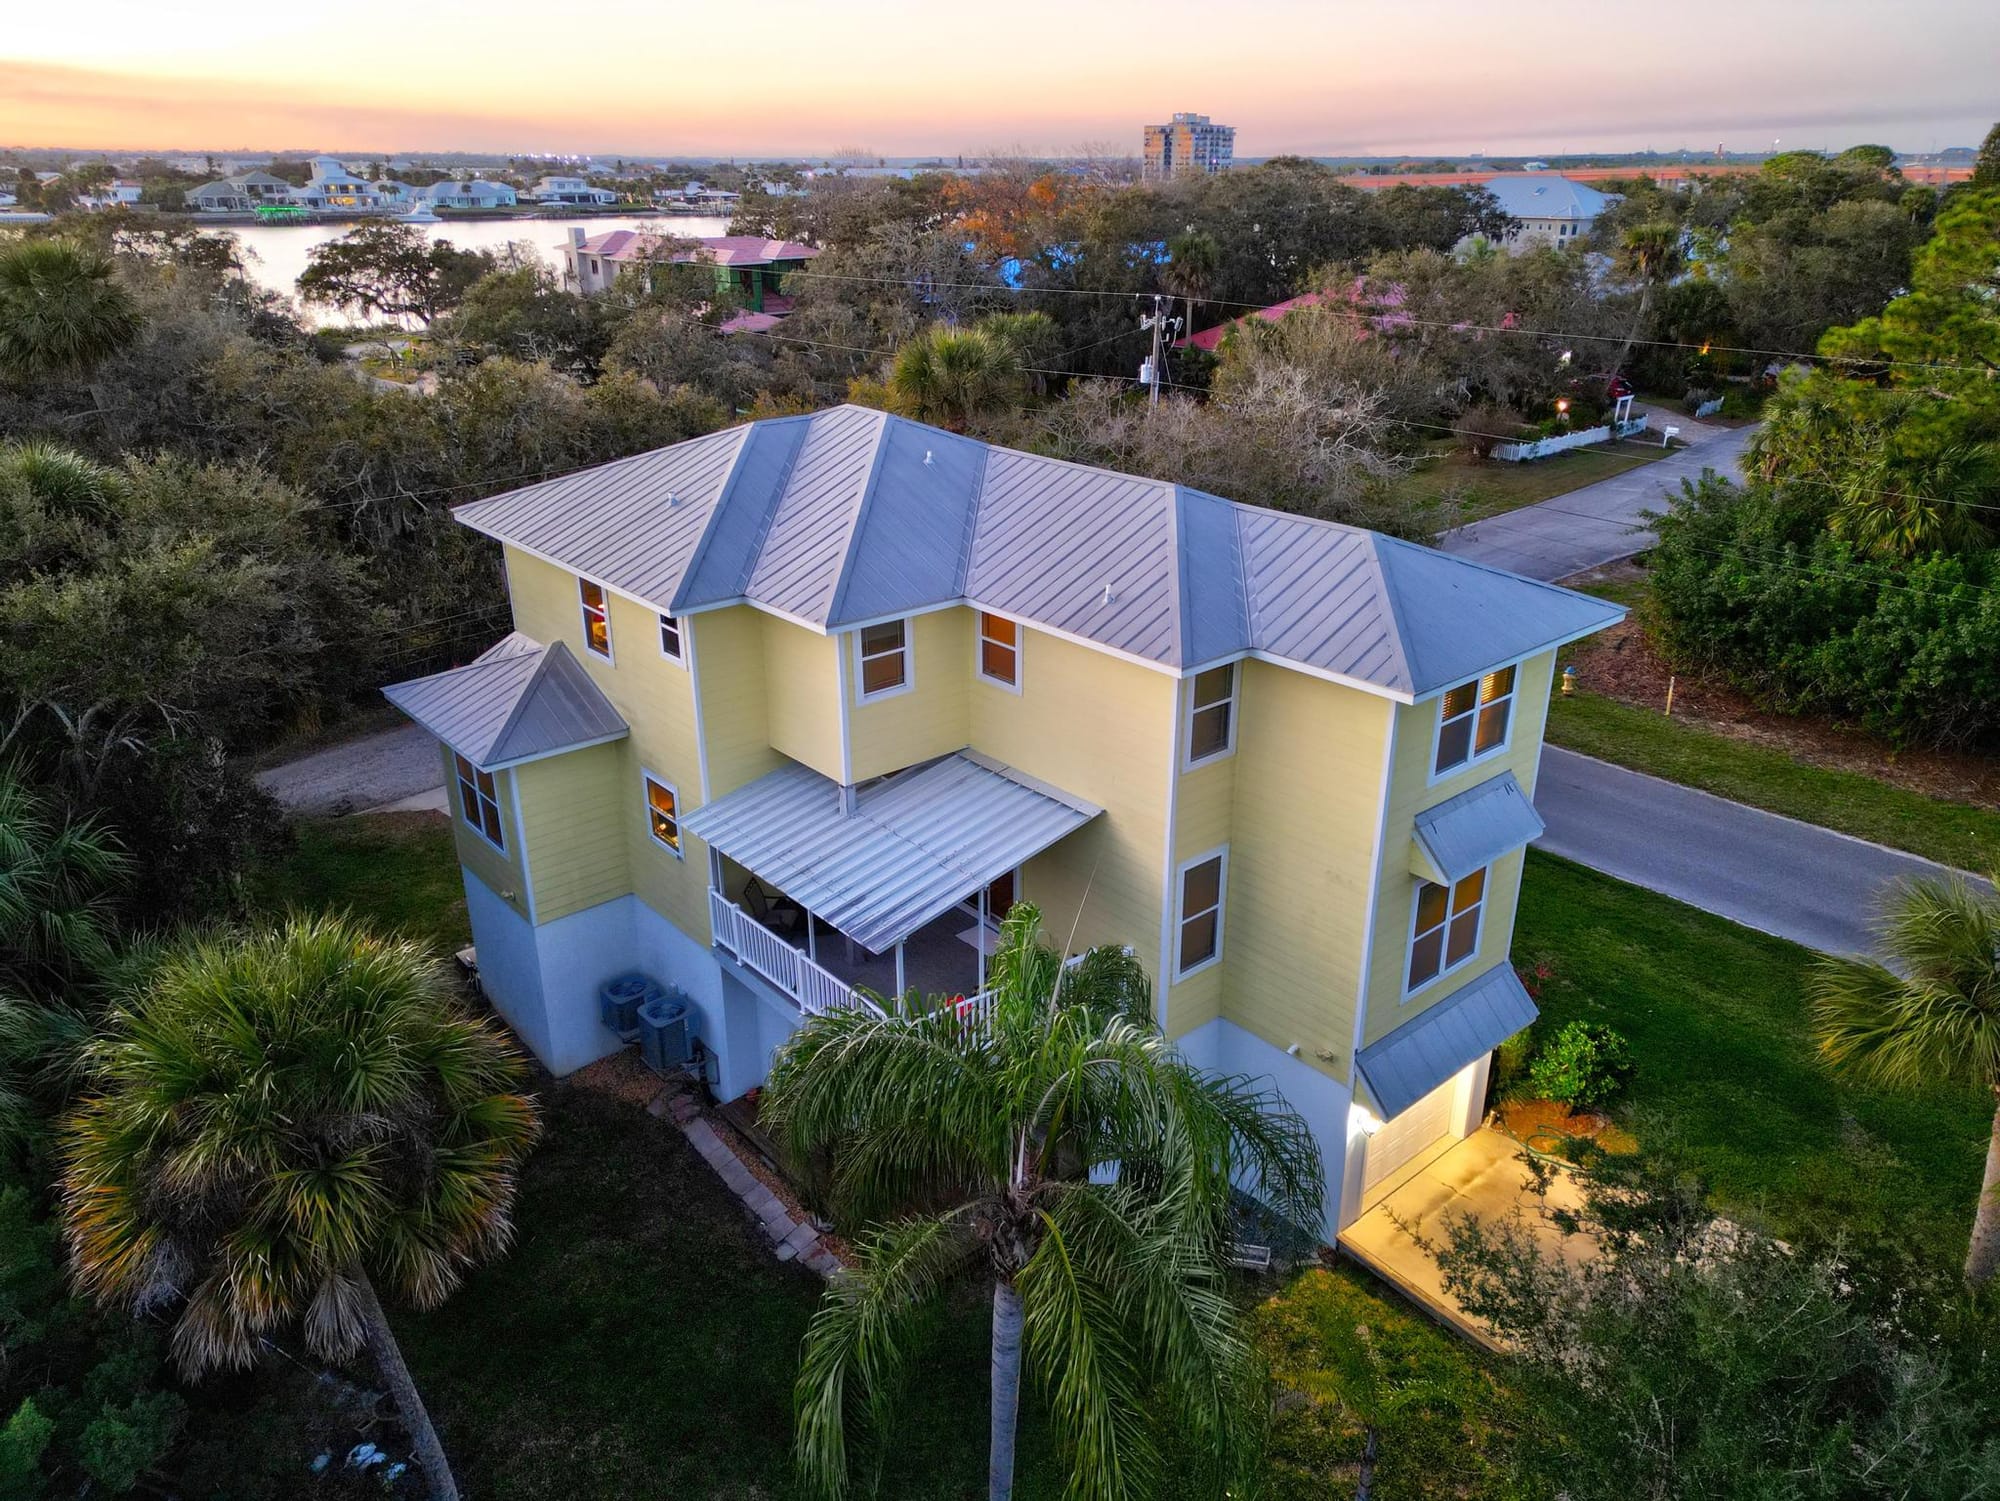 Virtual Open House Feature: Multifamily Development Potential - Luxury Beachfront Residence in New Smyrna Beach